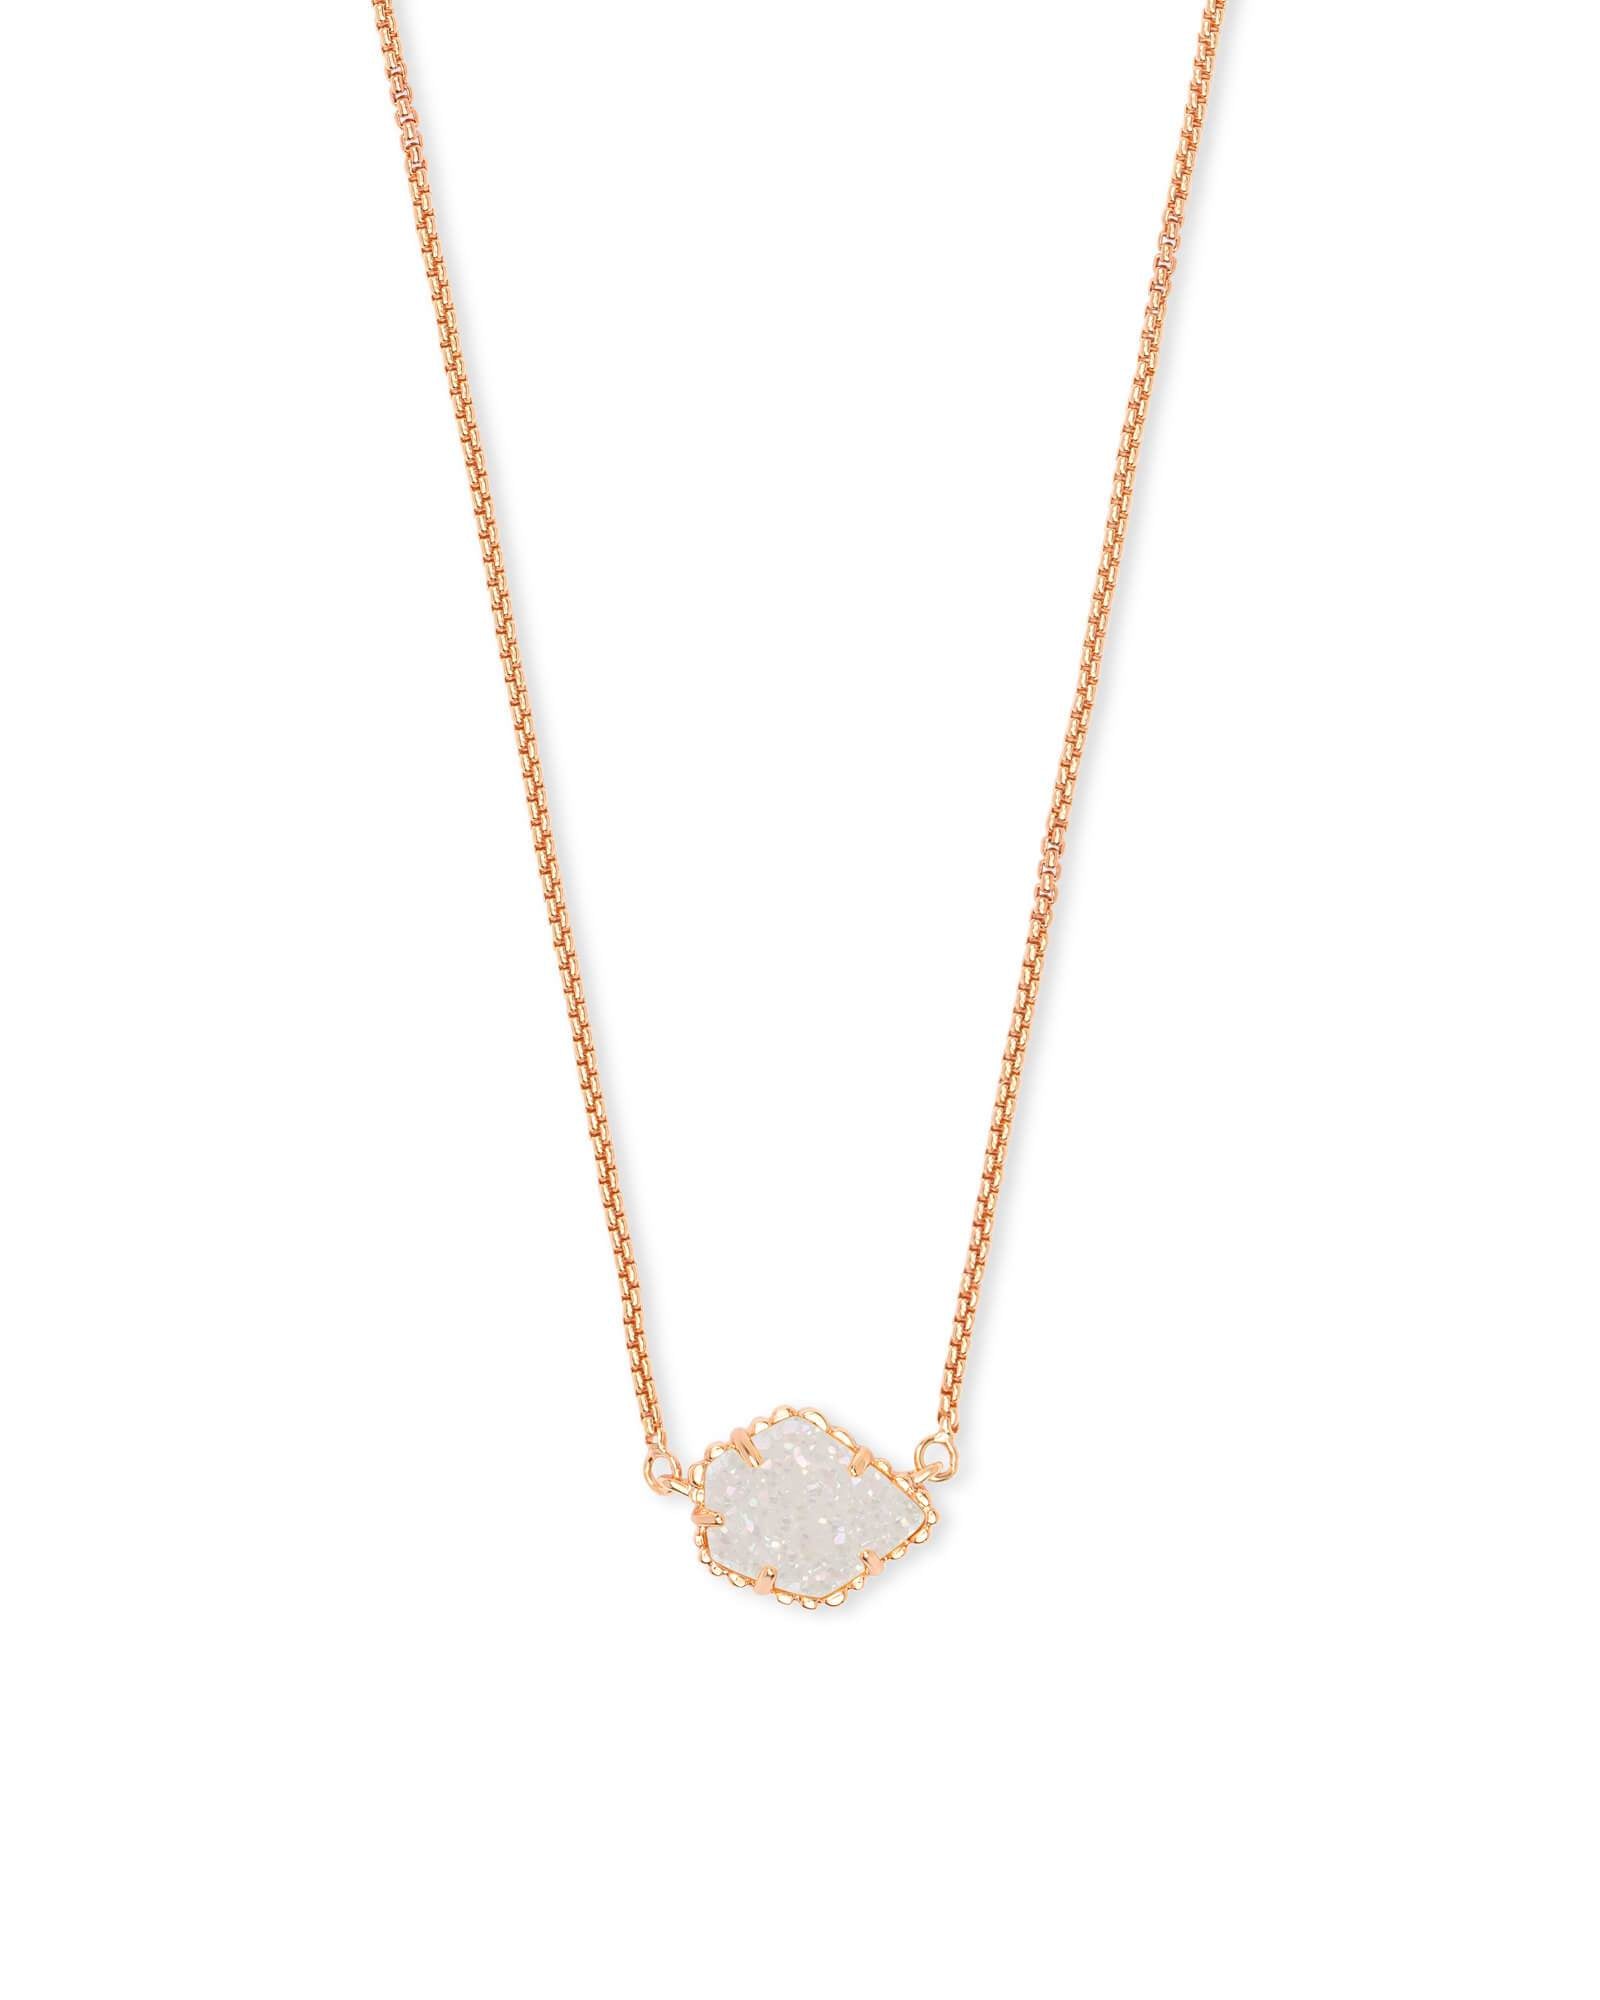 Tess Rose Gold Pendant Necklace - Iridescent Drusy Front View